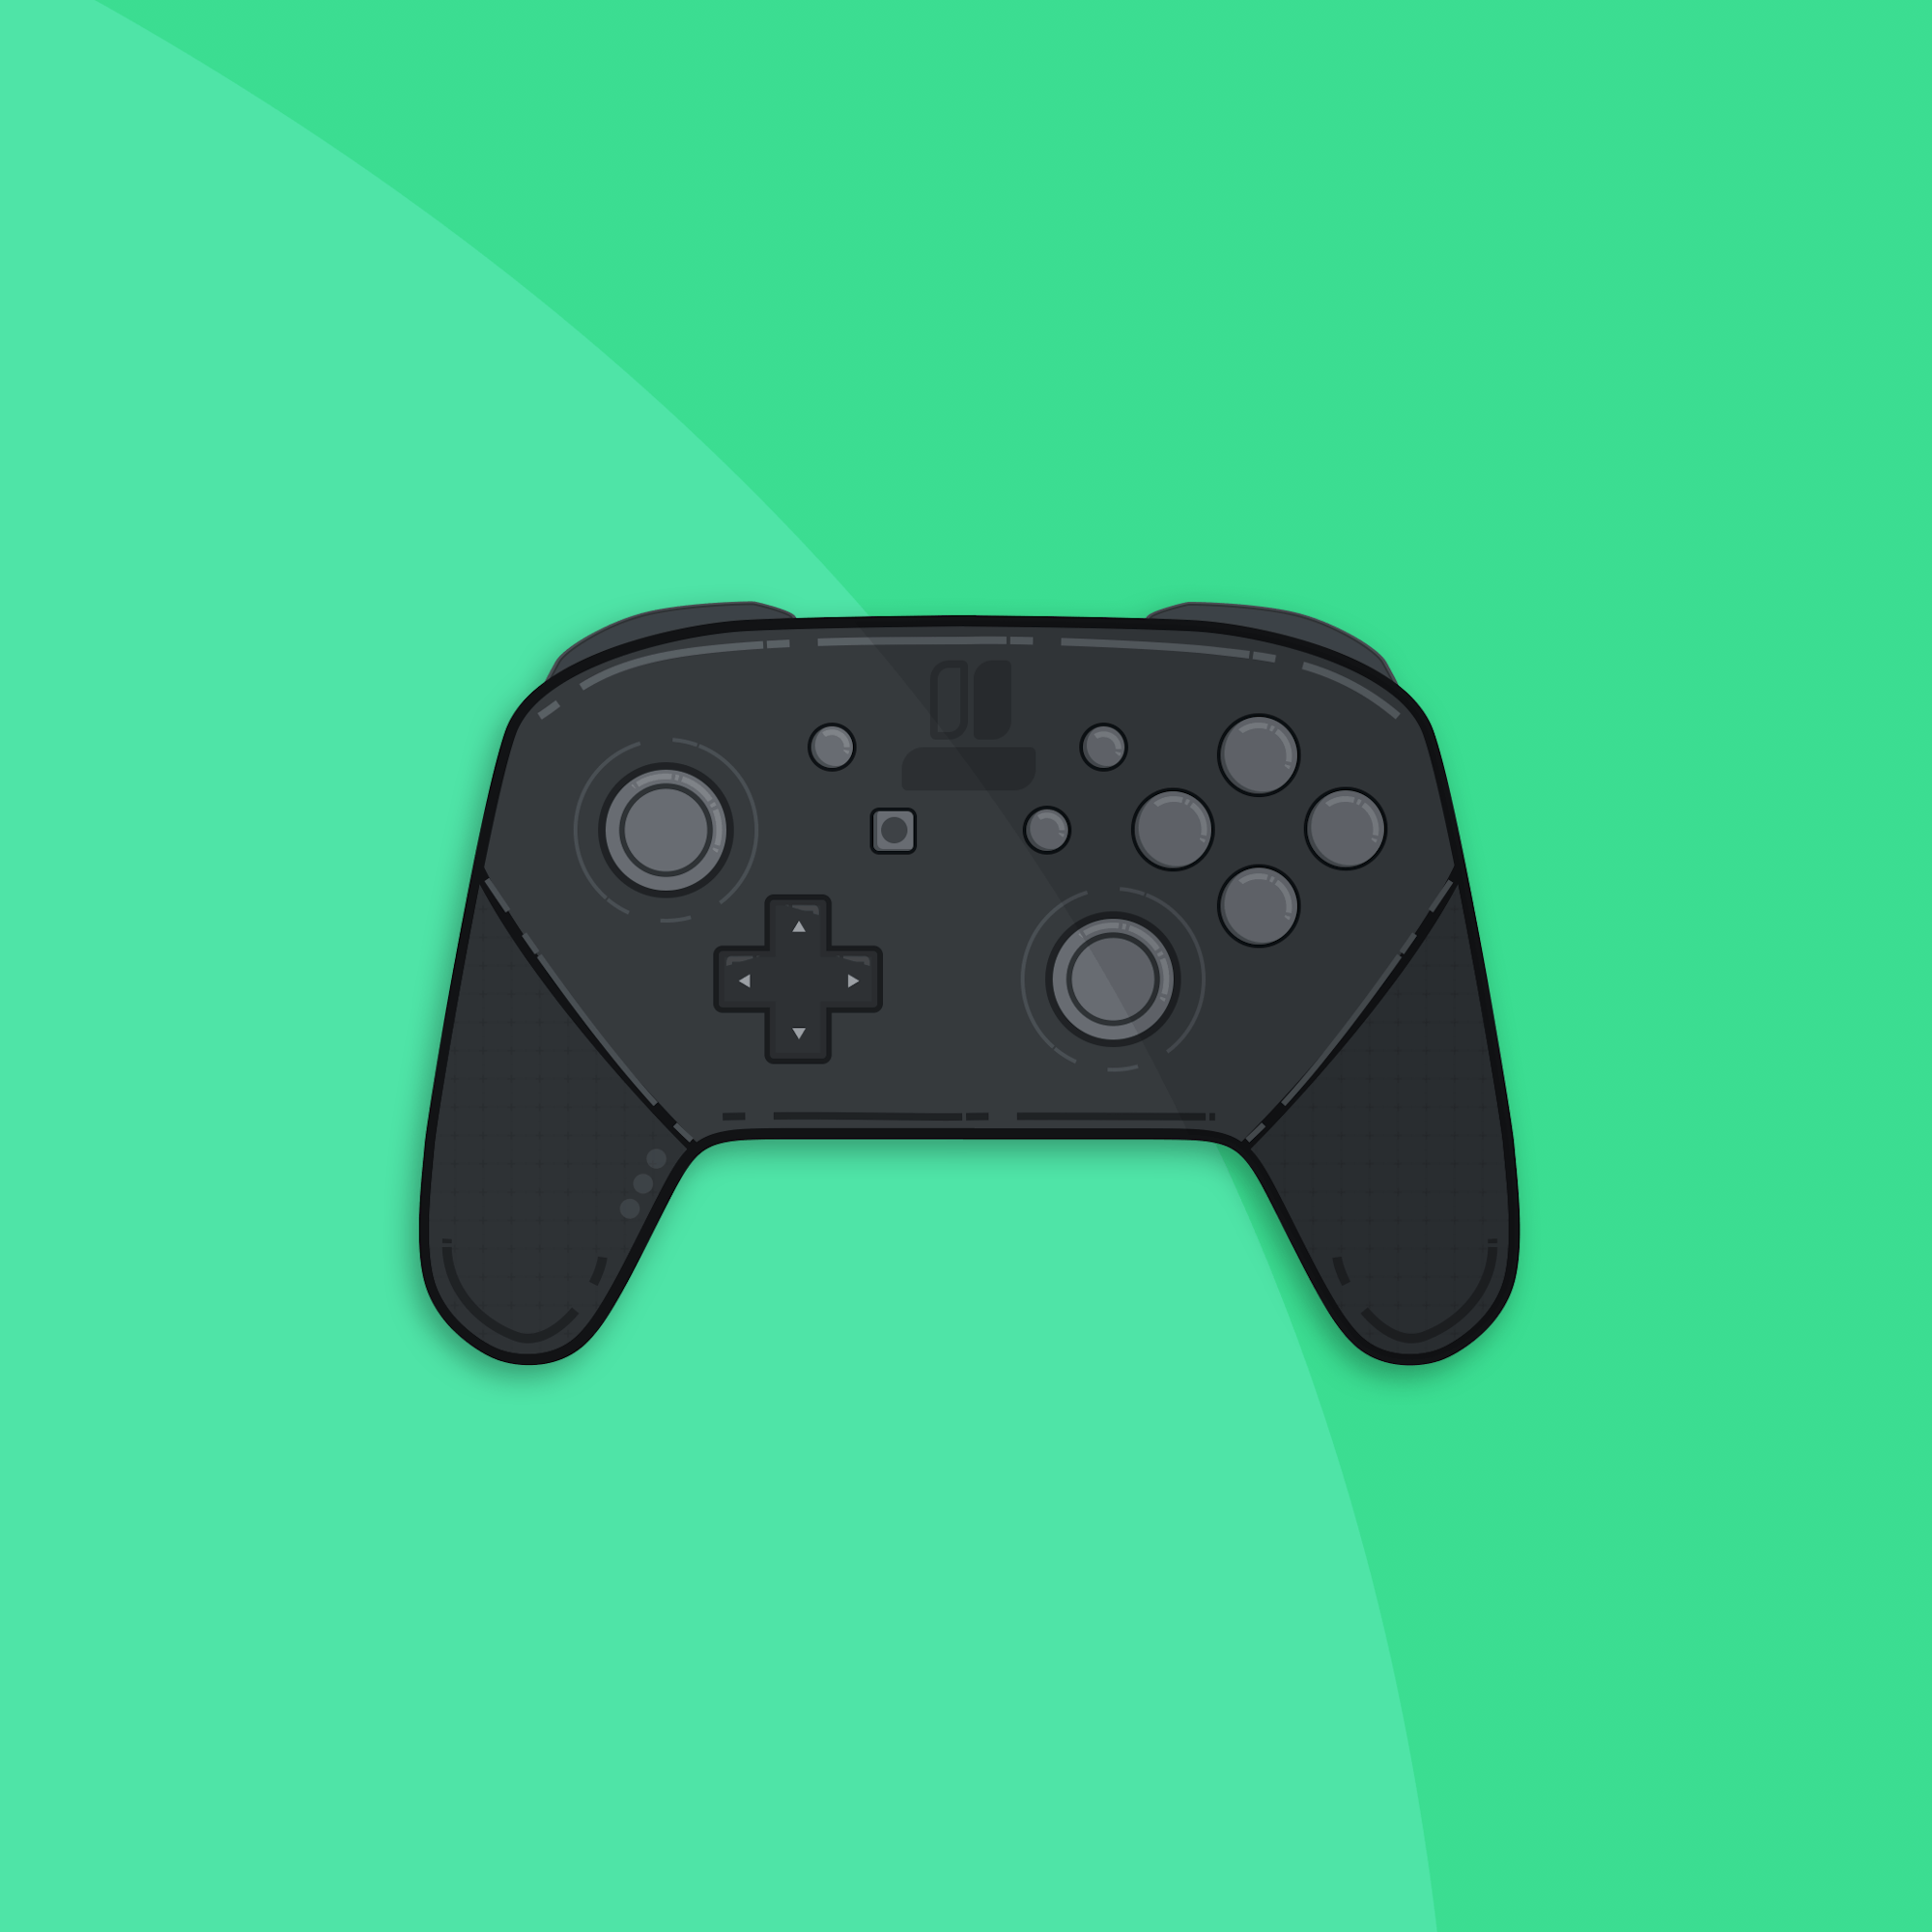 Switch Pro controller